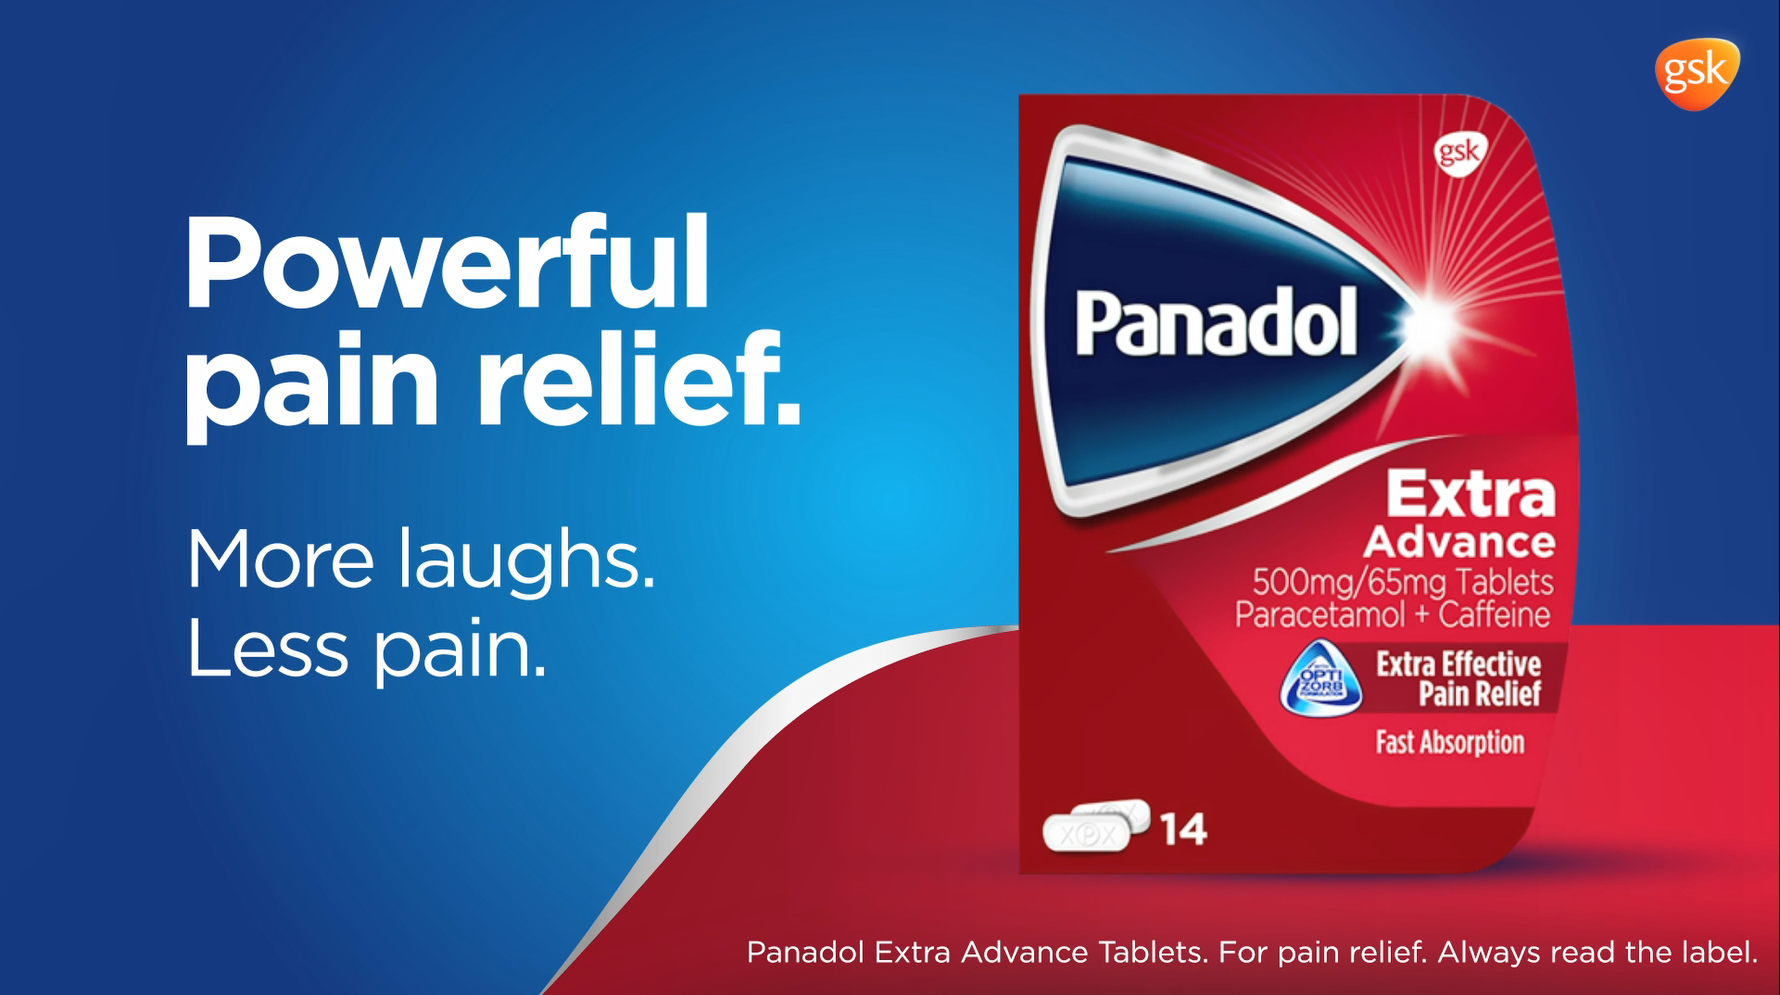 Panadol offers free access to premium comedy to help Brits laugh more